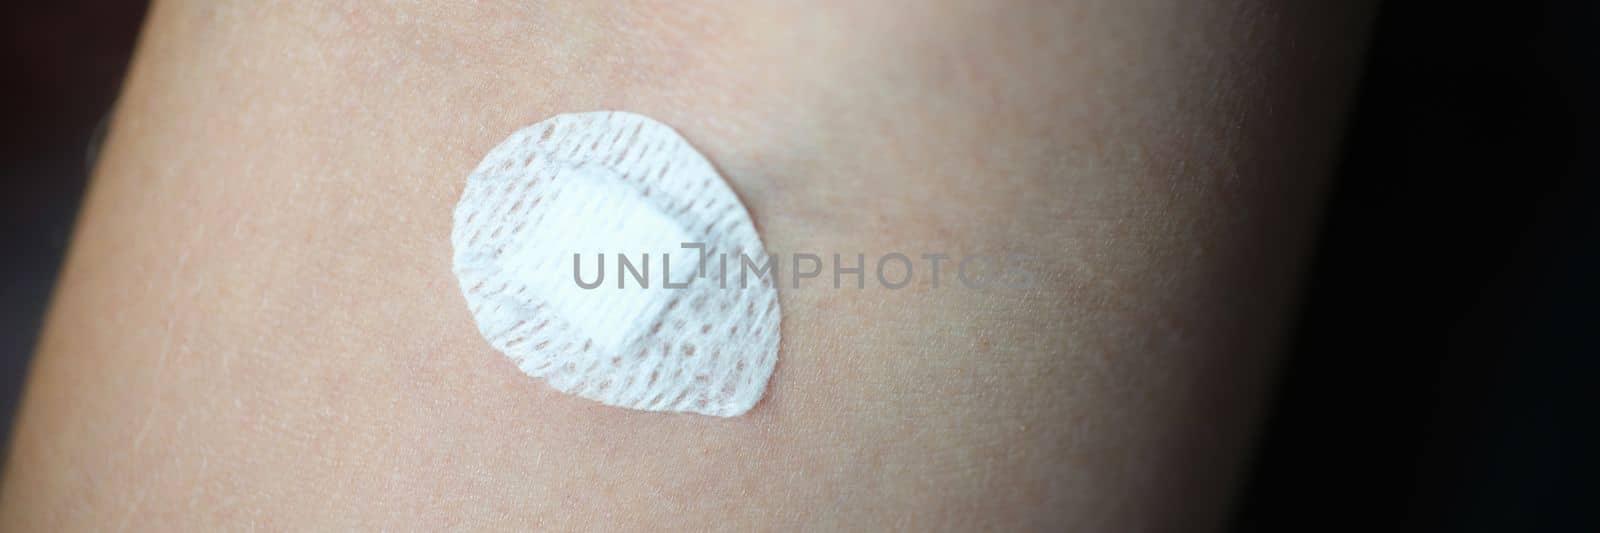 Small round patch stuck in place intravenous injection on forearm closeup by kuprevich